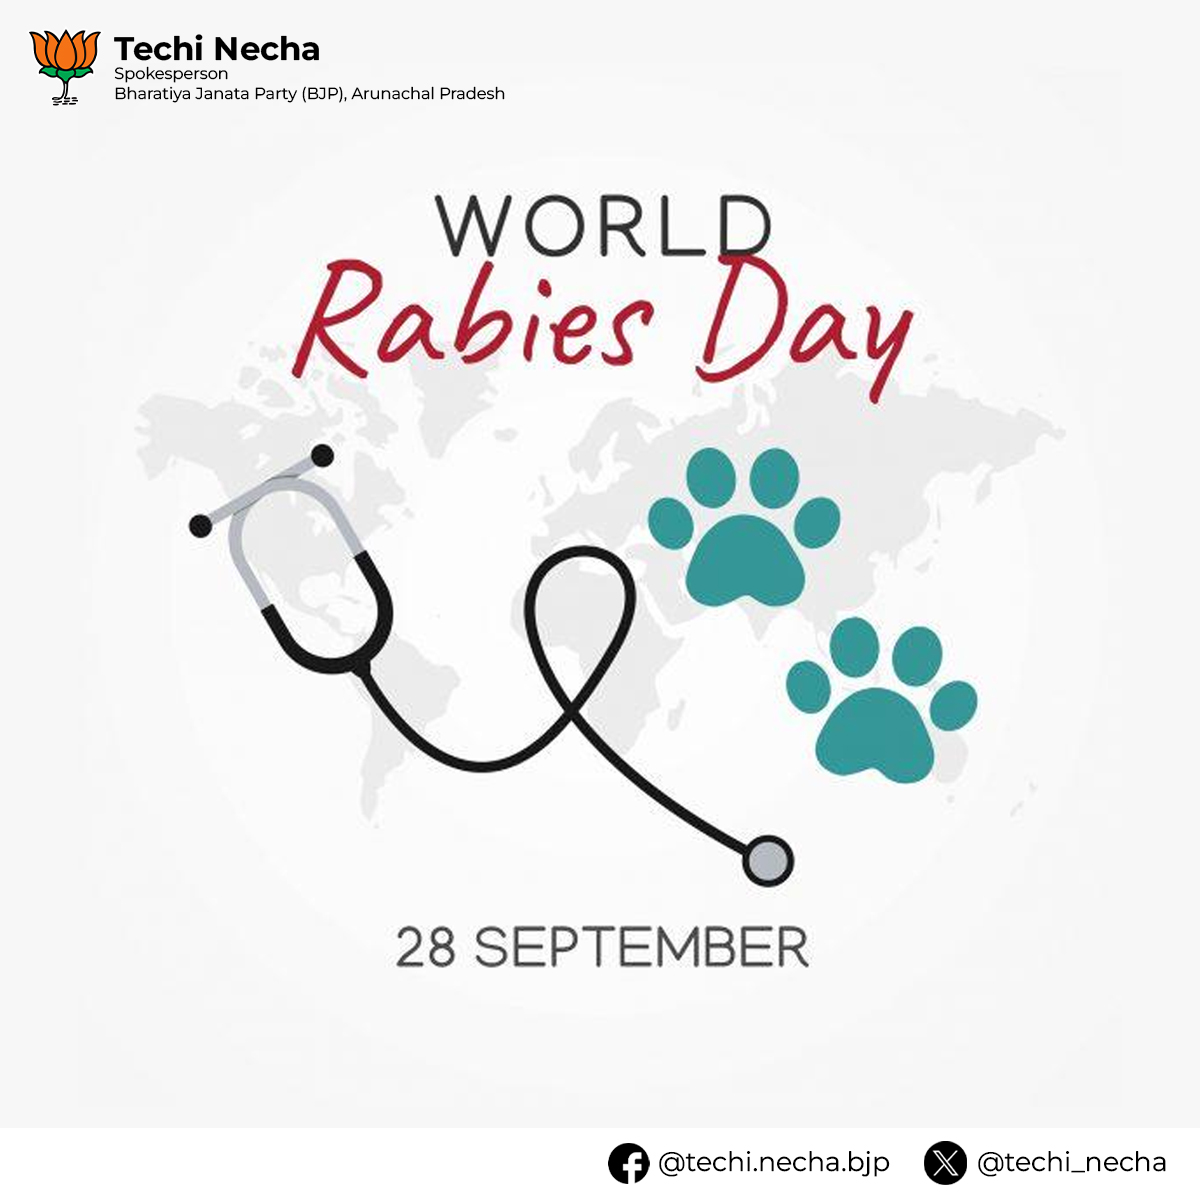 1/2
On World Rabies Day, let us come together to raise awareness about the importance of rabies prevention and control.

Rabies is a deadly disease that affects both humans and animals. 
#WorldRabiesDay #RabiesPrevention #CommunityHealth #AnimalWelfare